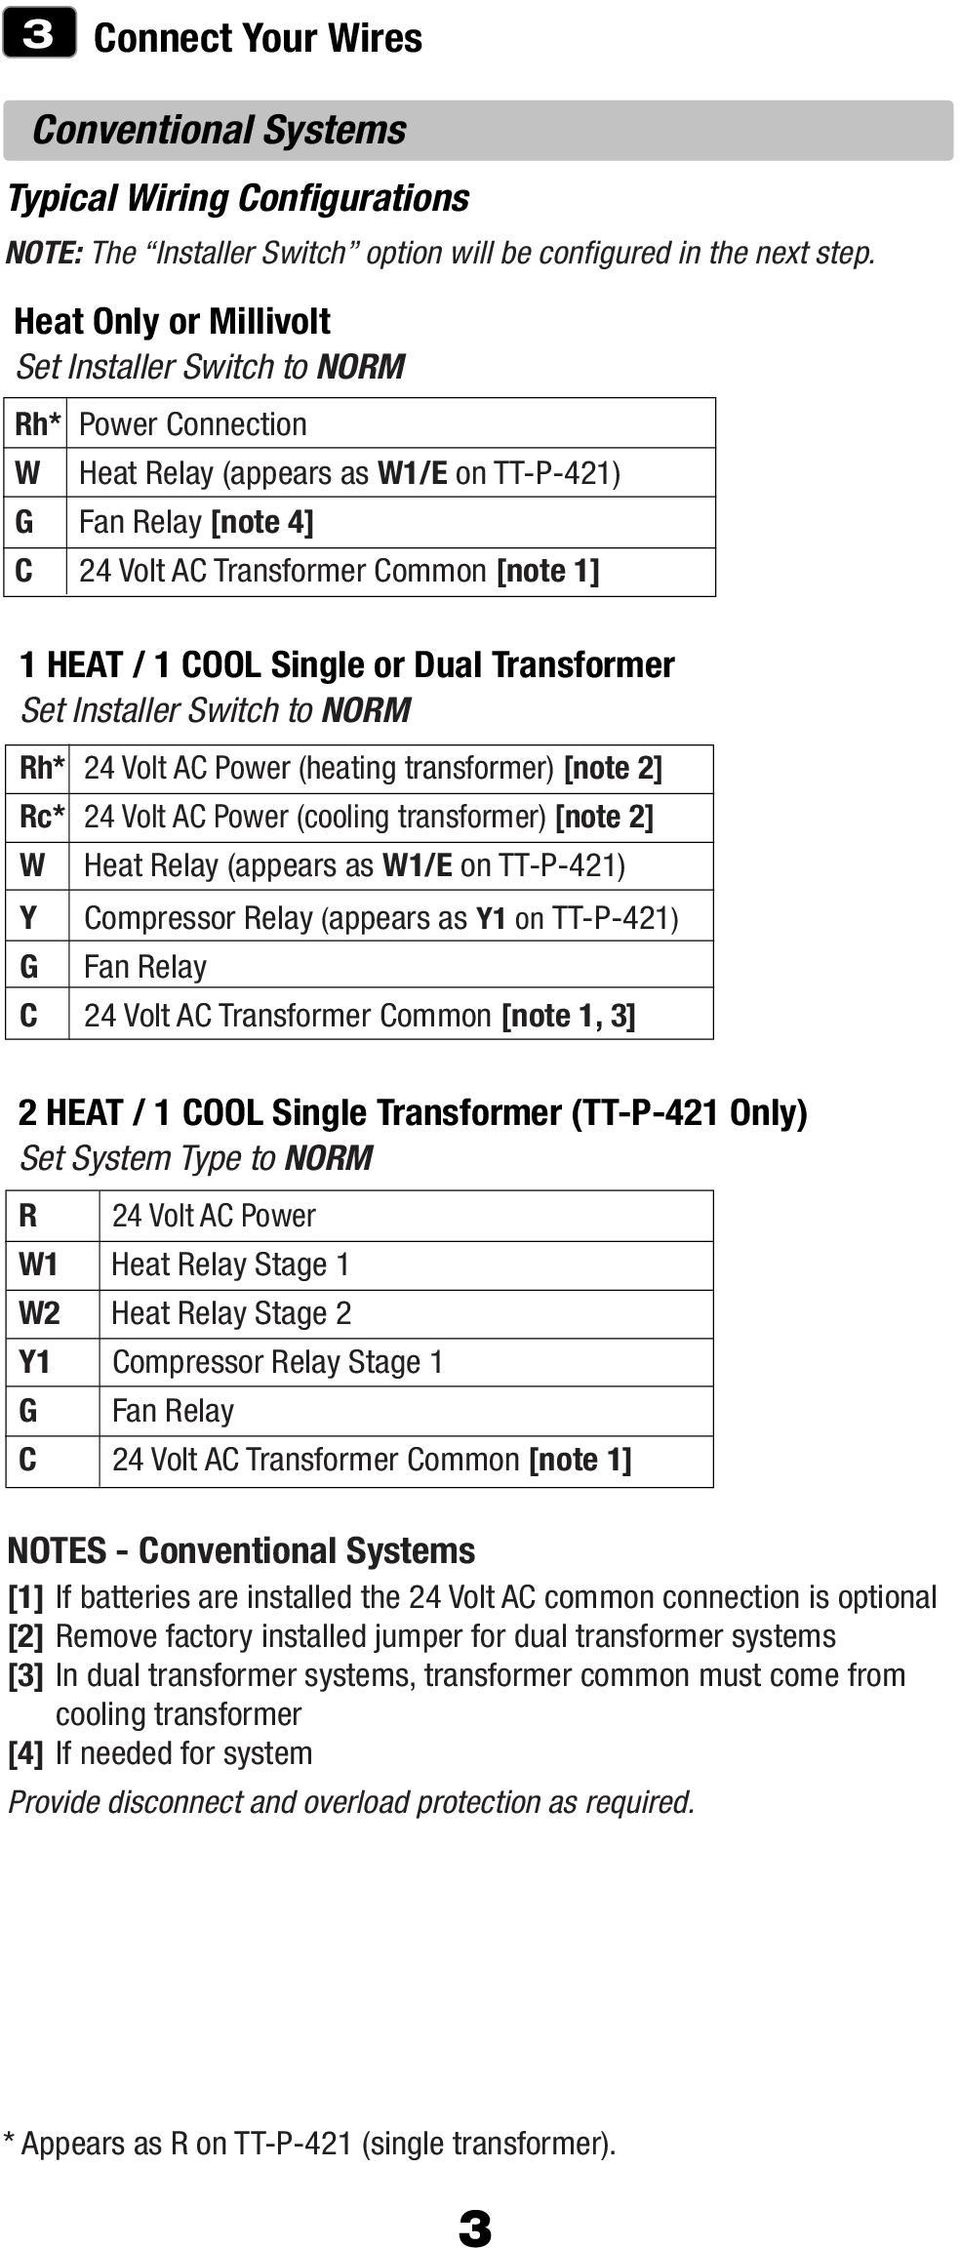 Heat Relay (appears as W1/E on TT-P-421) G Fan Relay [note 4] C 24 Volt AC Transformer Common [note 1] 1 HEAT / 1 COOL Single or Dual Transformer Set Installer Switch to NORM Rh* 24 Volt AC Power